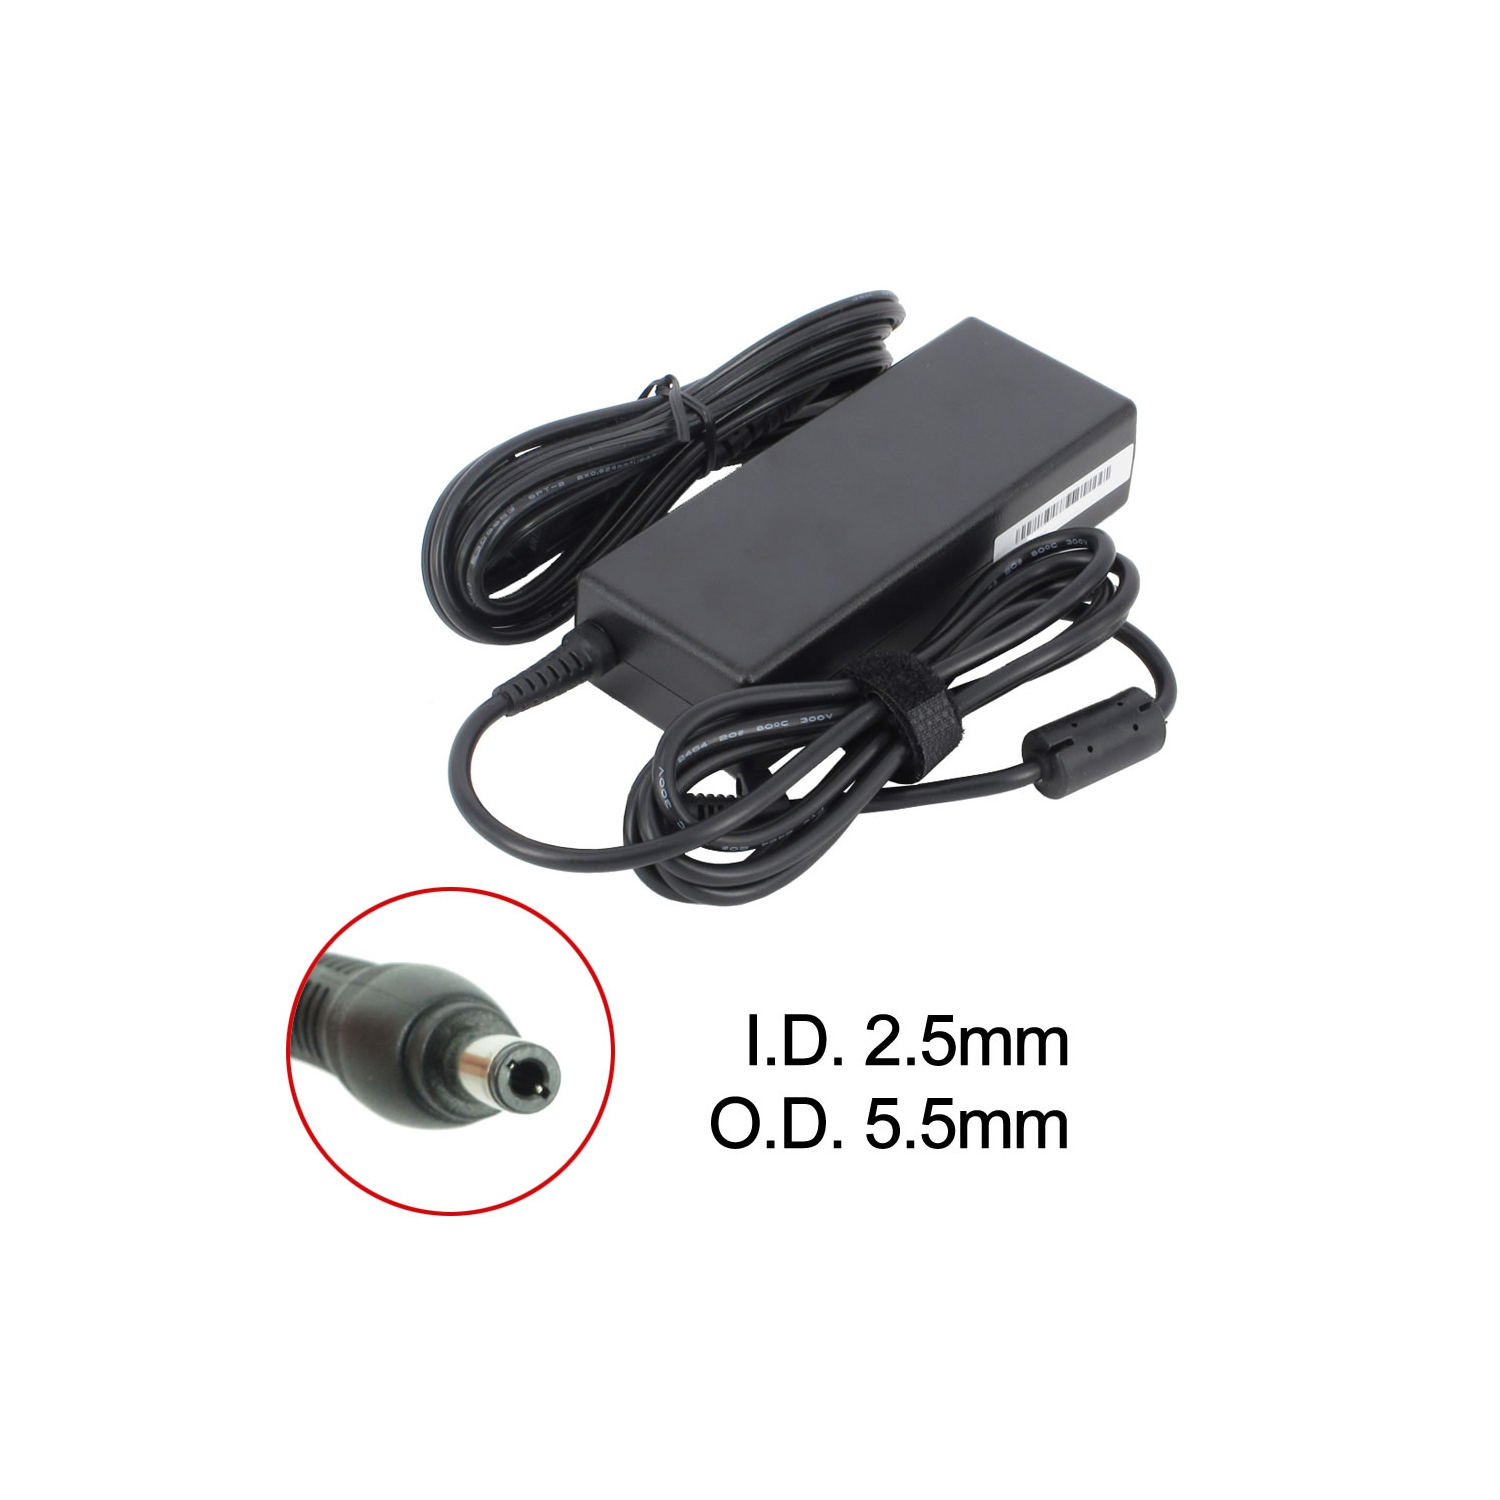 New Laptop AC Adapter for Fujitsu Pro Amilo V8210, 04G266010610, 6500693, 90-N6EPW2012, ADP-90CDDB, PA-1900-24, PPP014S